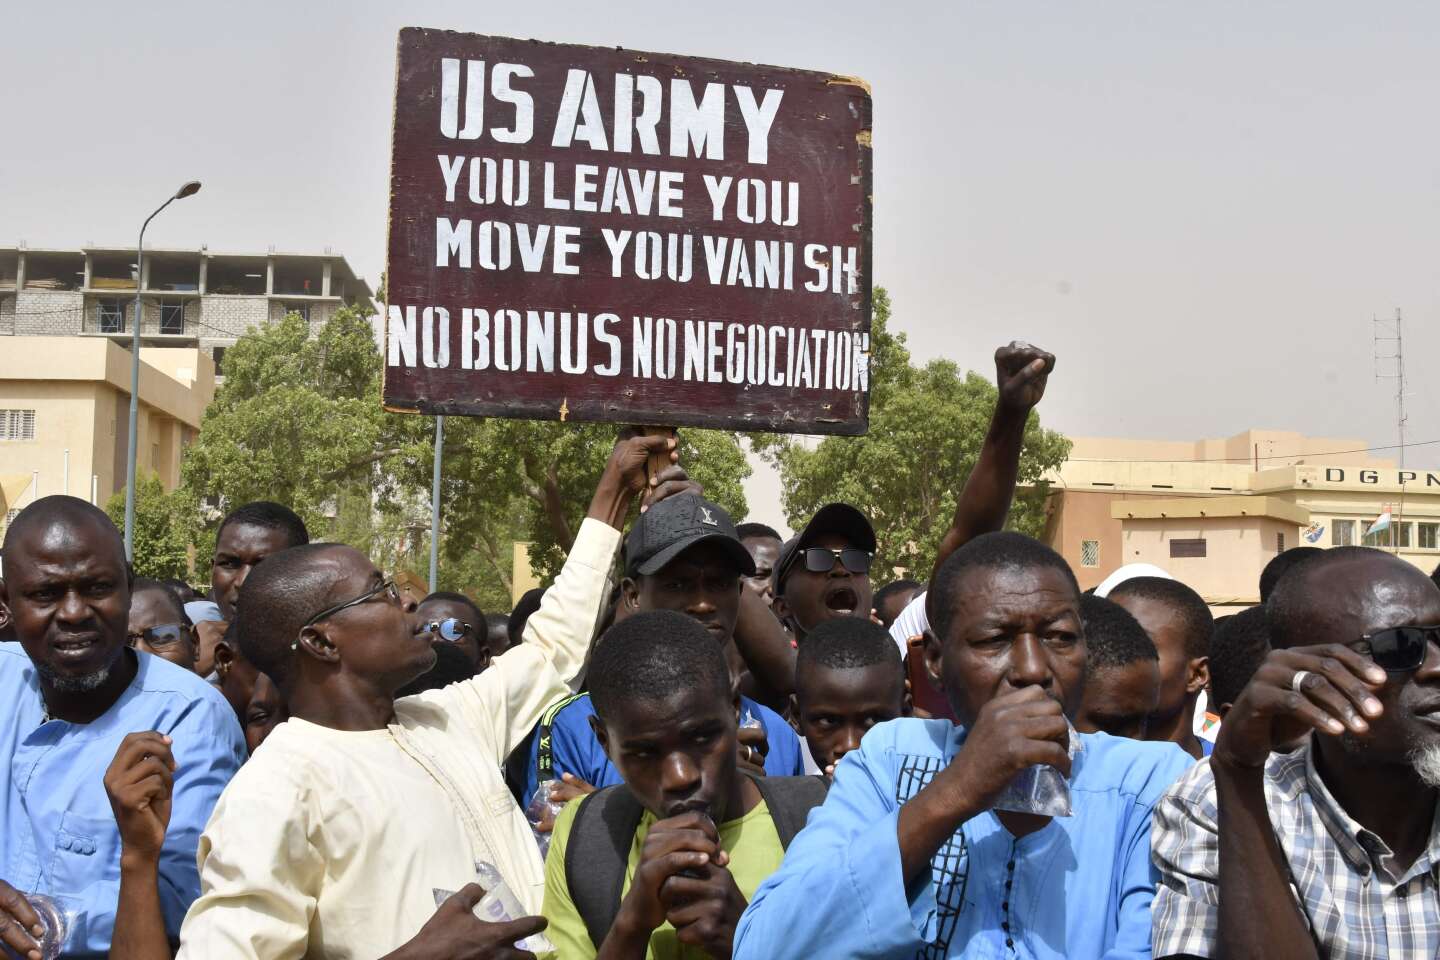 The United States agreed to withdraw its troops from Niger